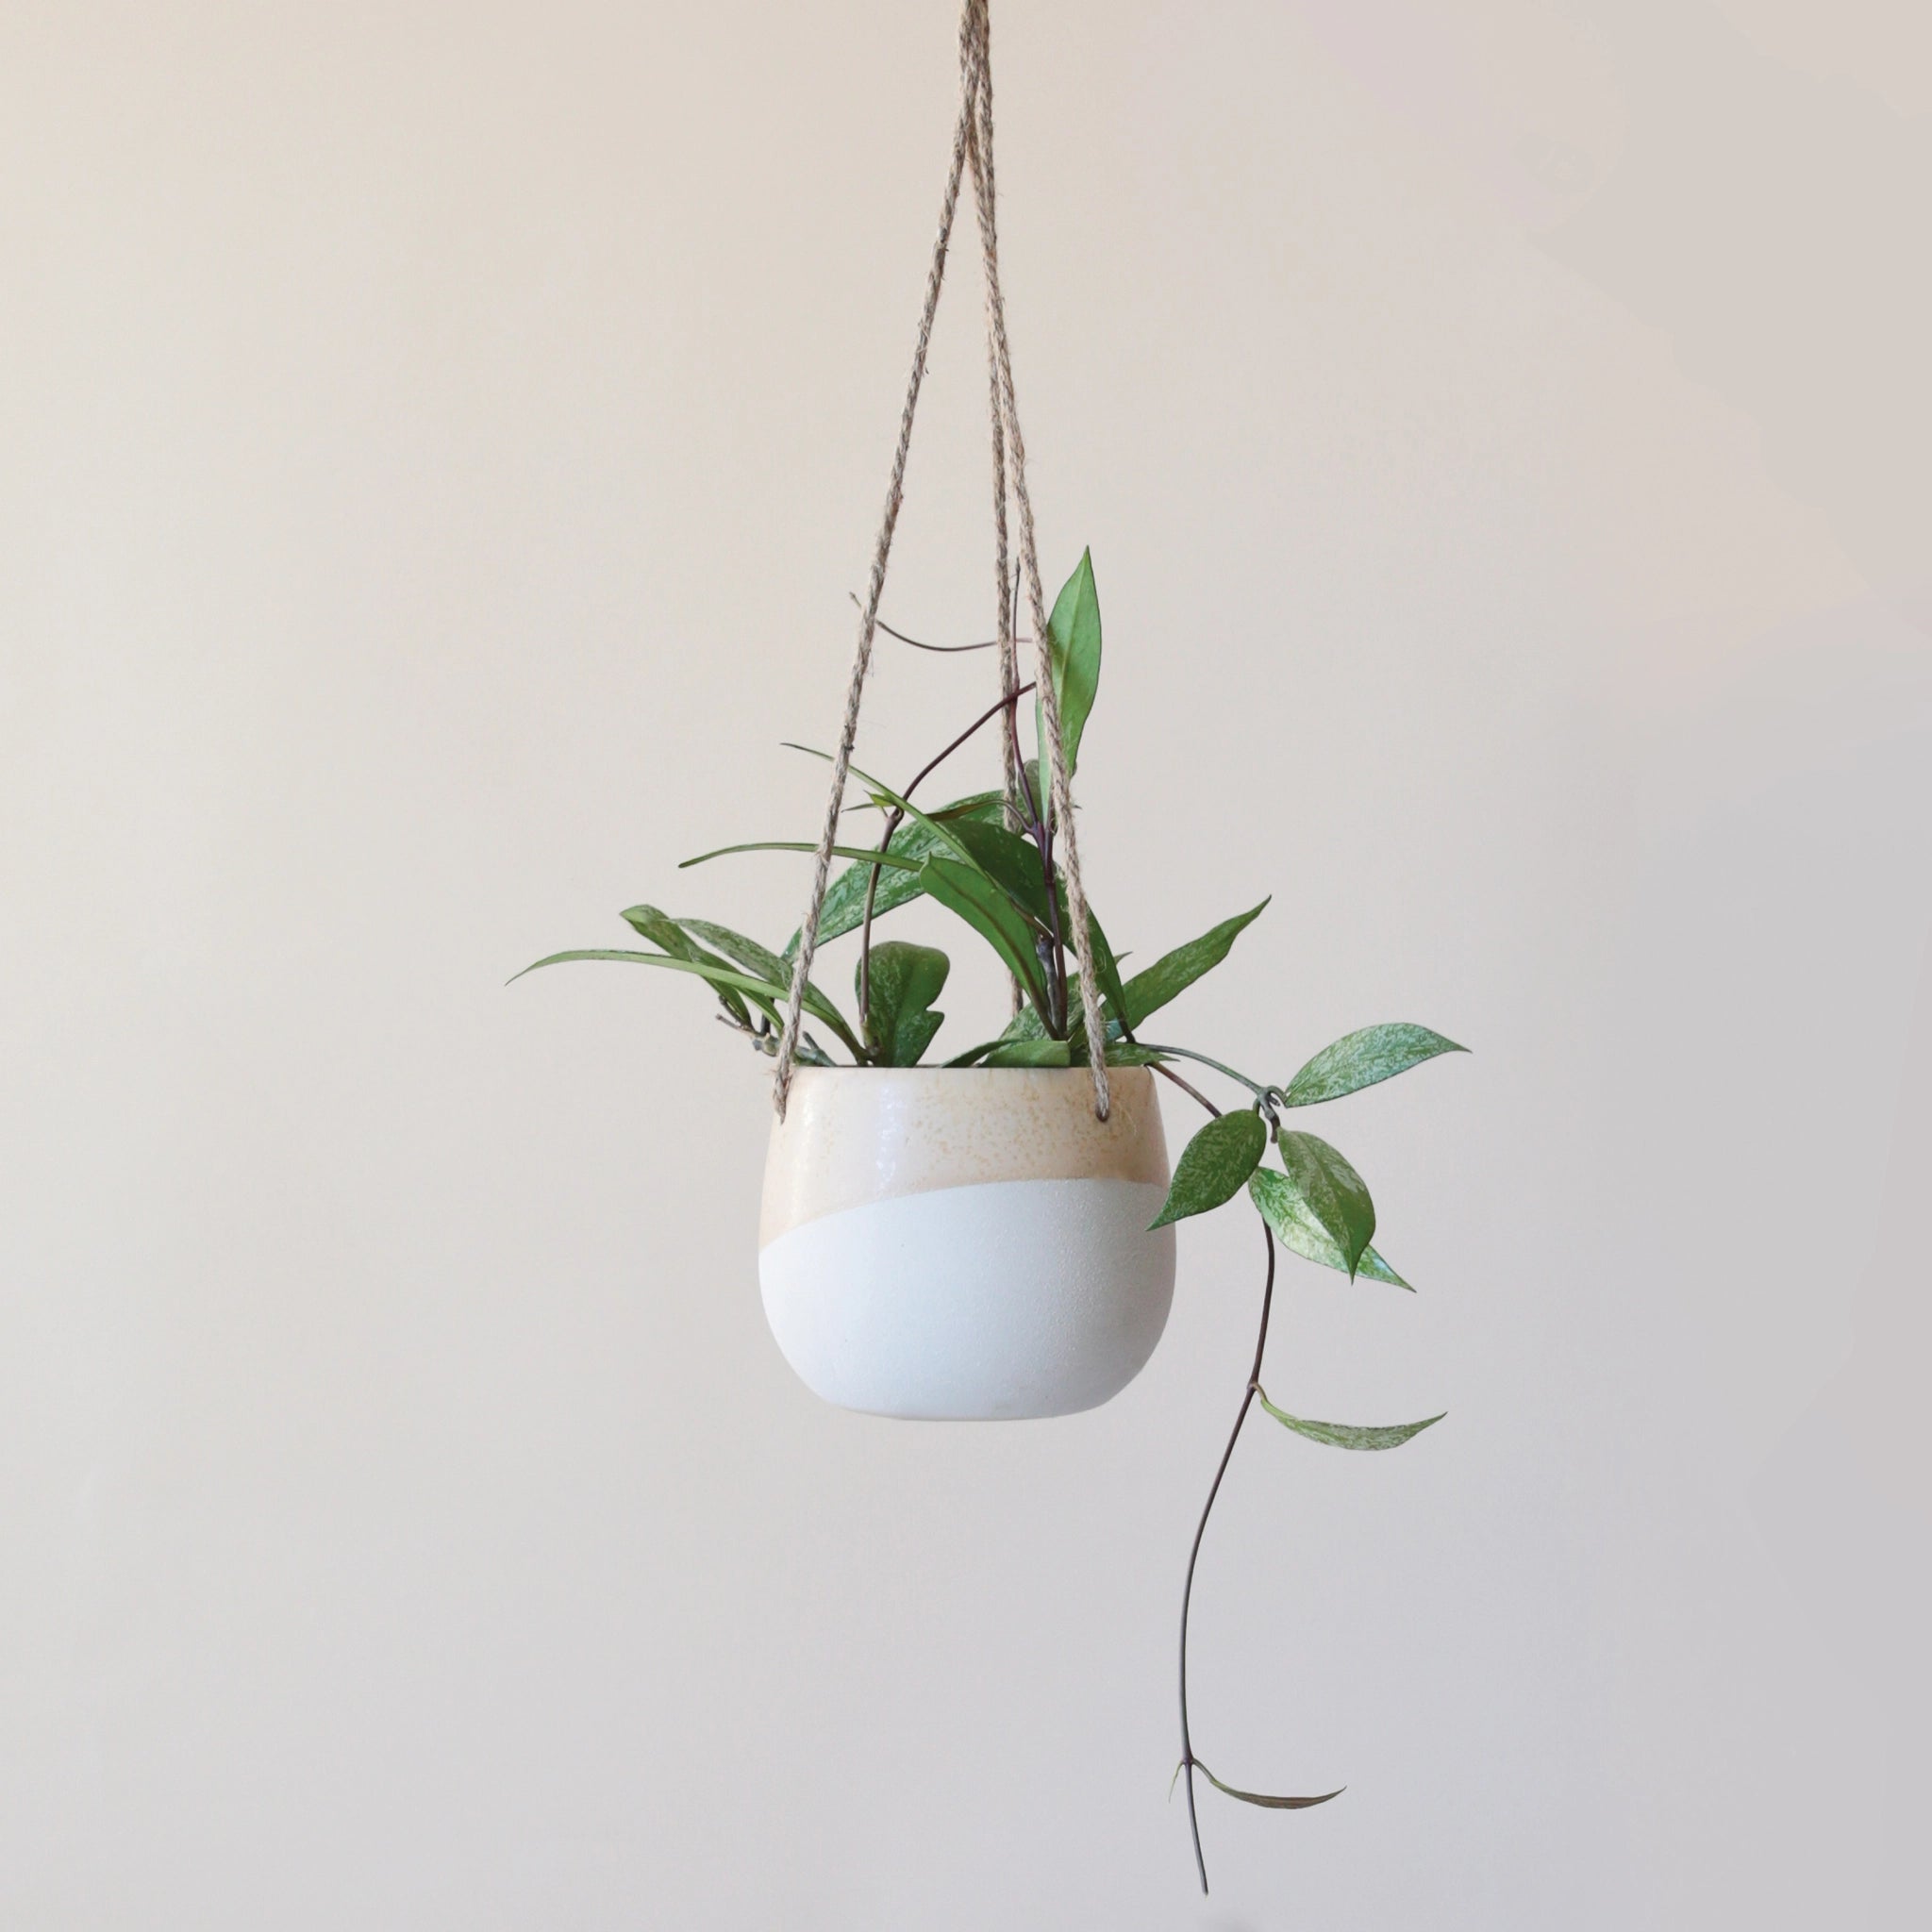 The smaller neutral ceramic hanging planter with rounded sides and a flat bottom along with a half cream half tan design and three jute strings as the hangers and photographed with a green viney house plant.